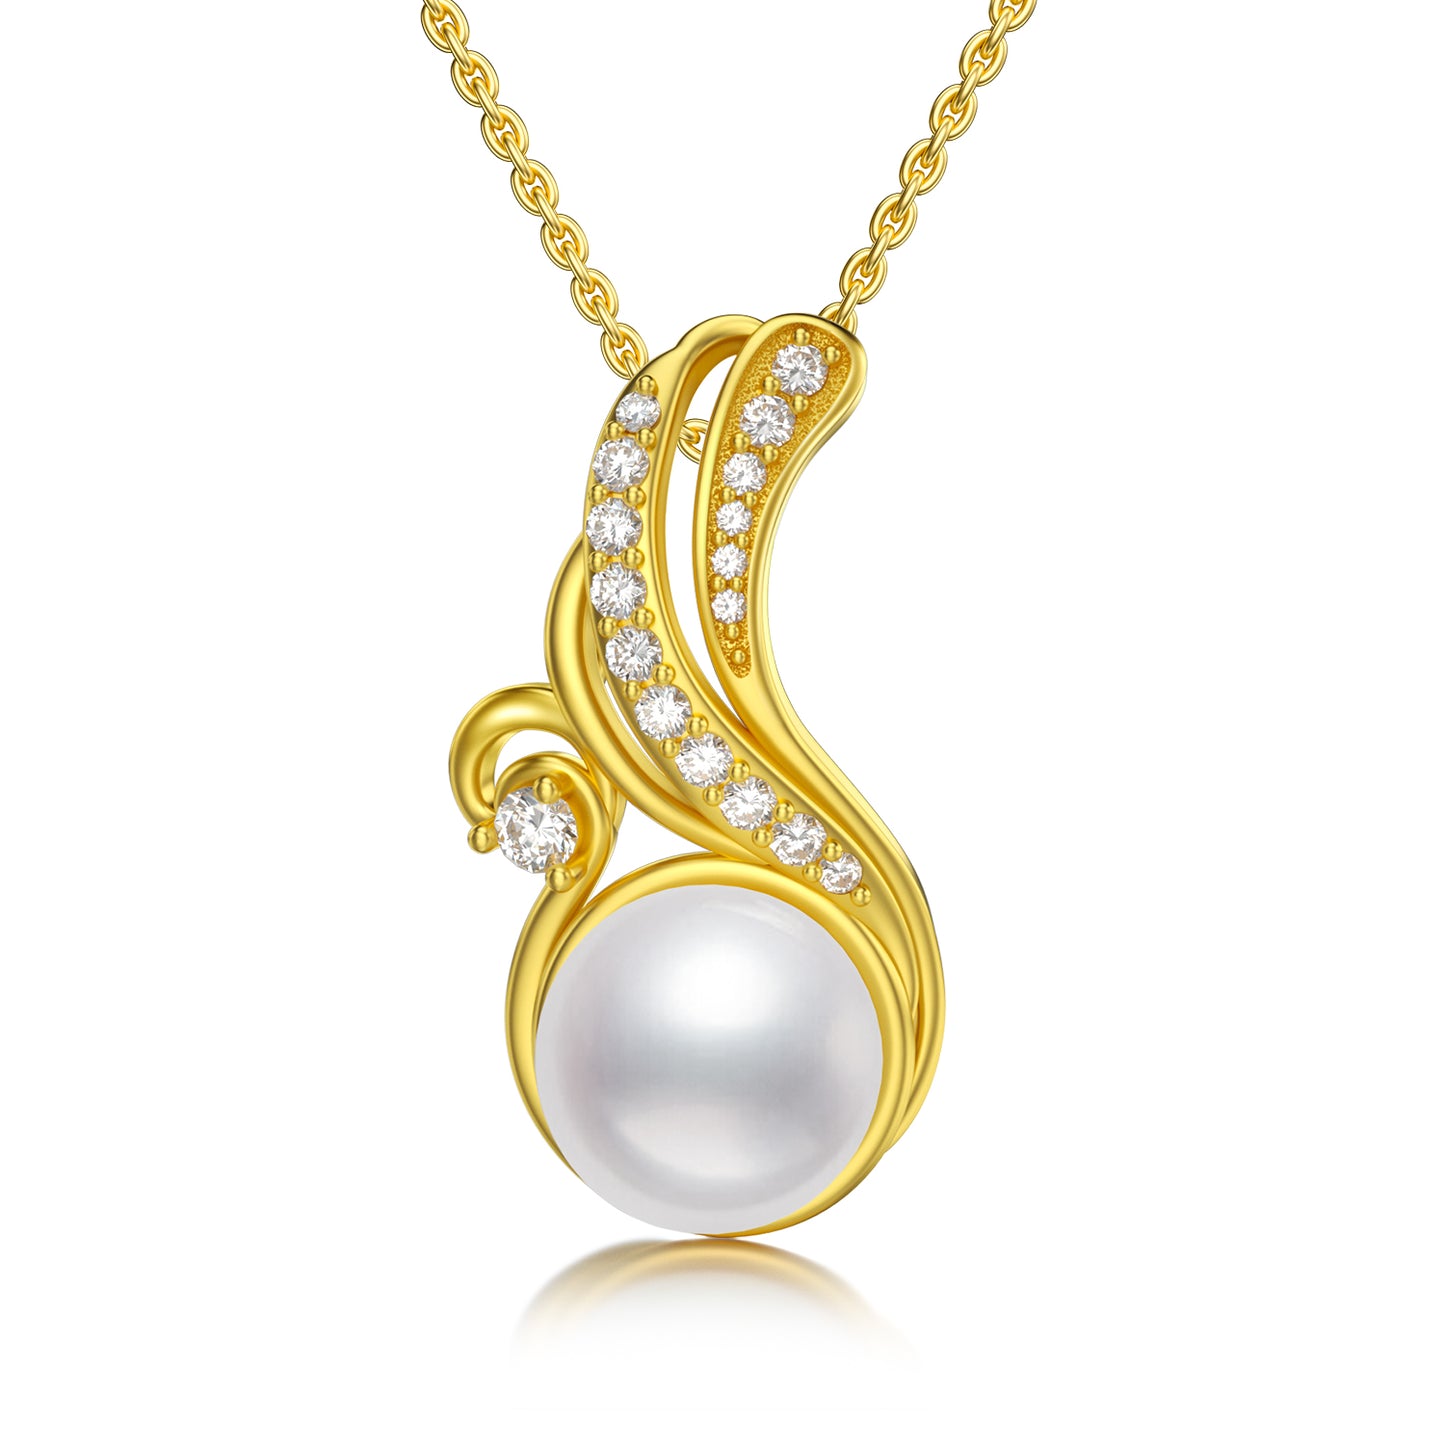 Gold Plated Ocean Wave Pearl Necklace S925 Sterling Silver Pendant Necklaces for Women